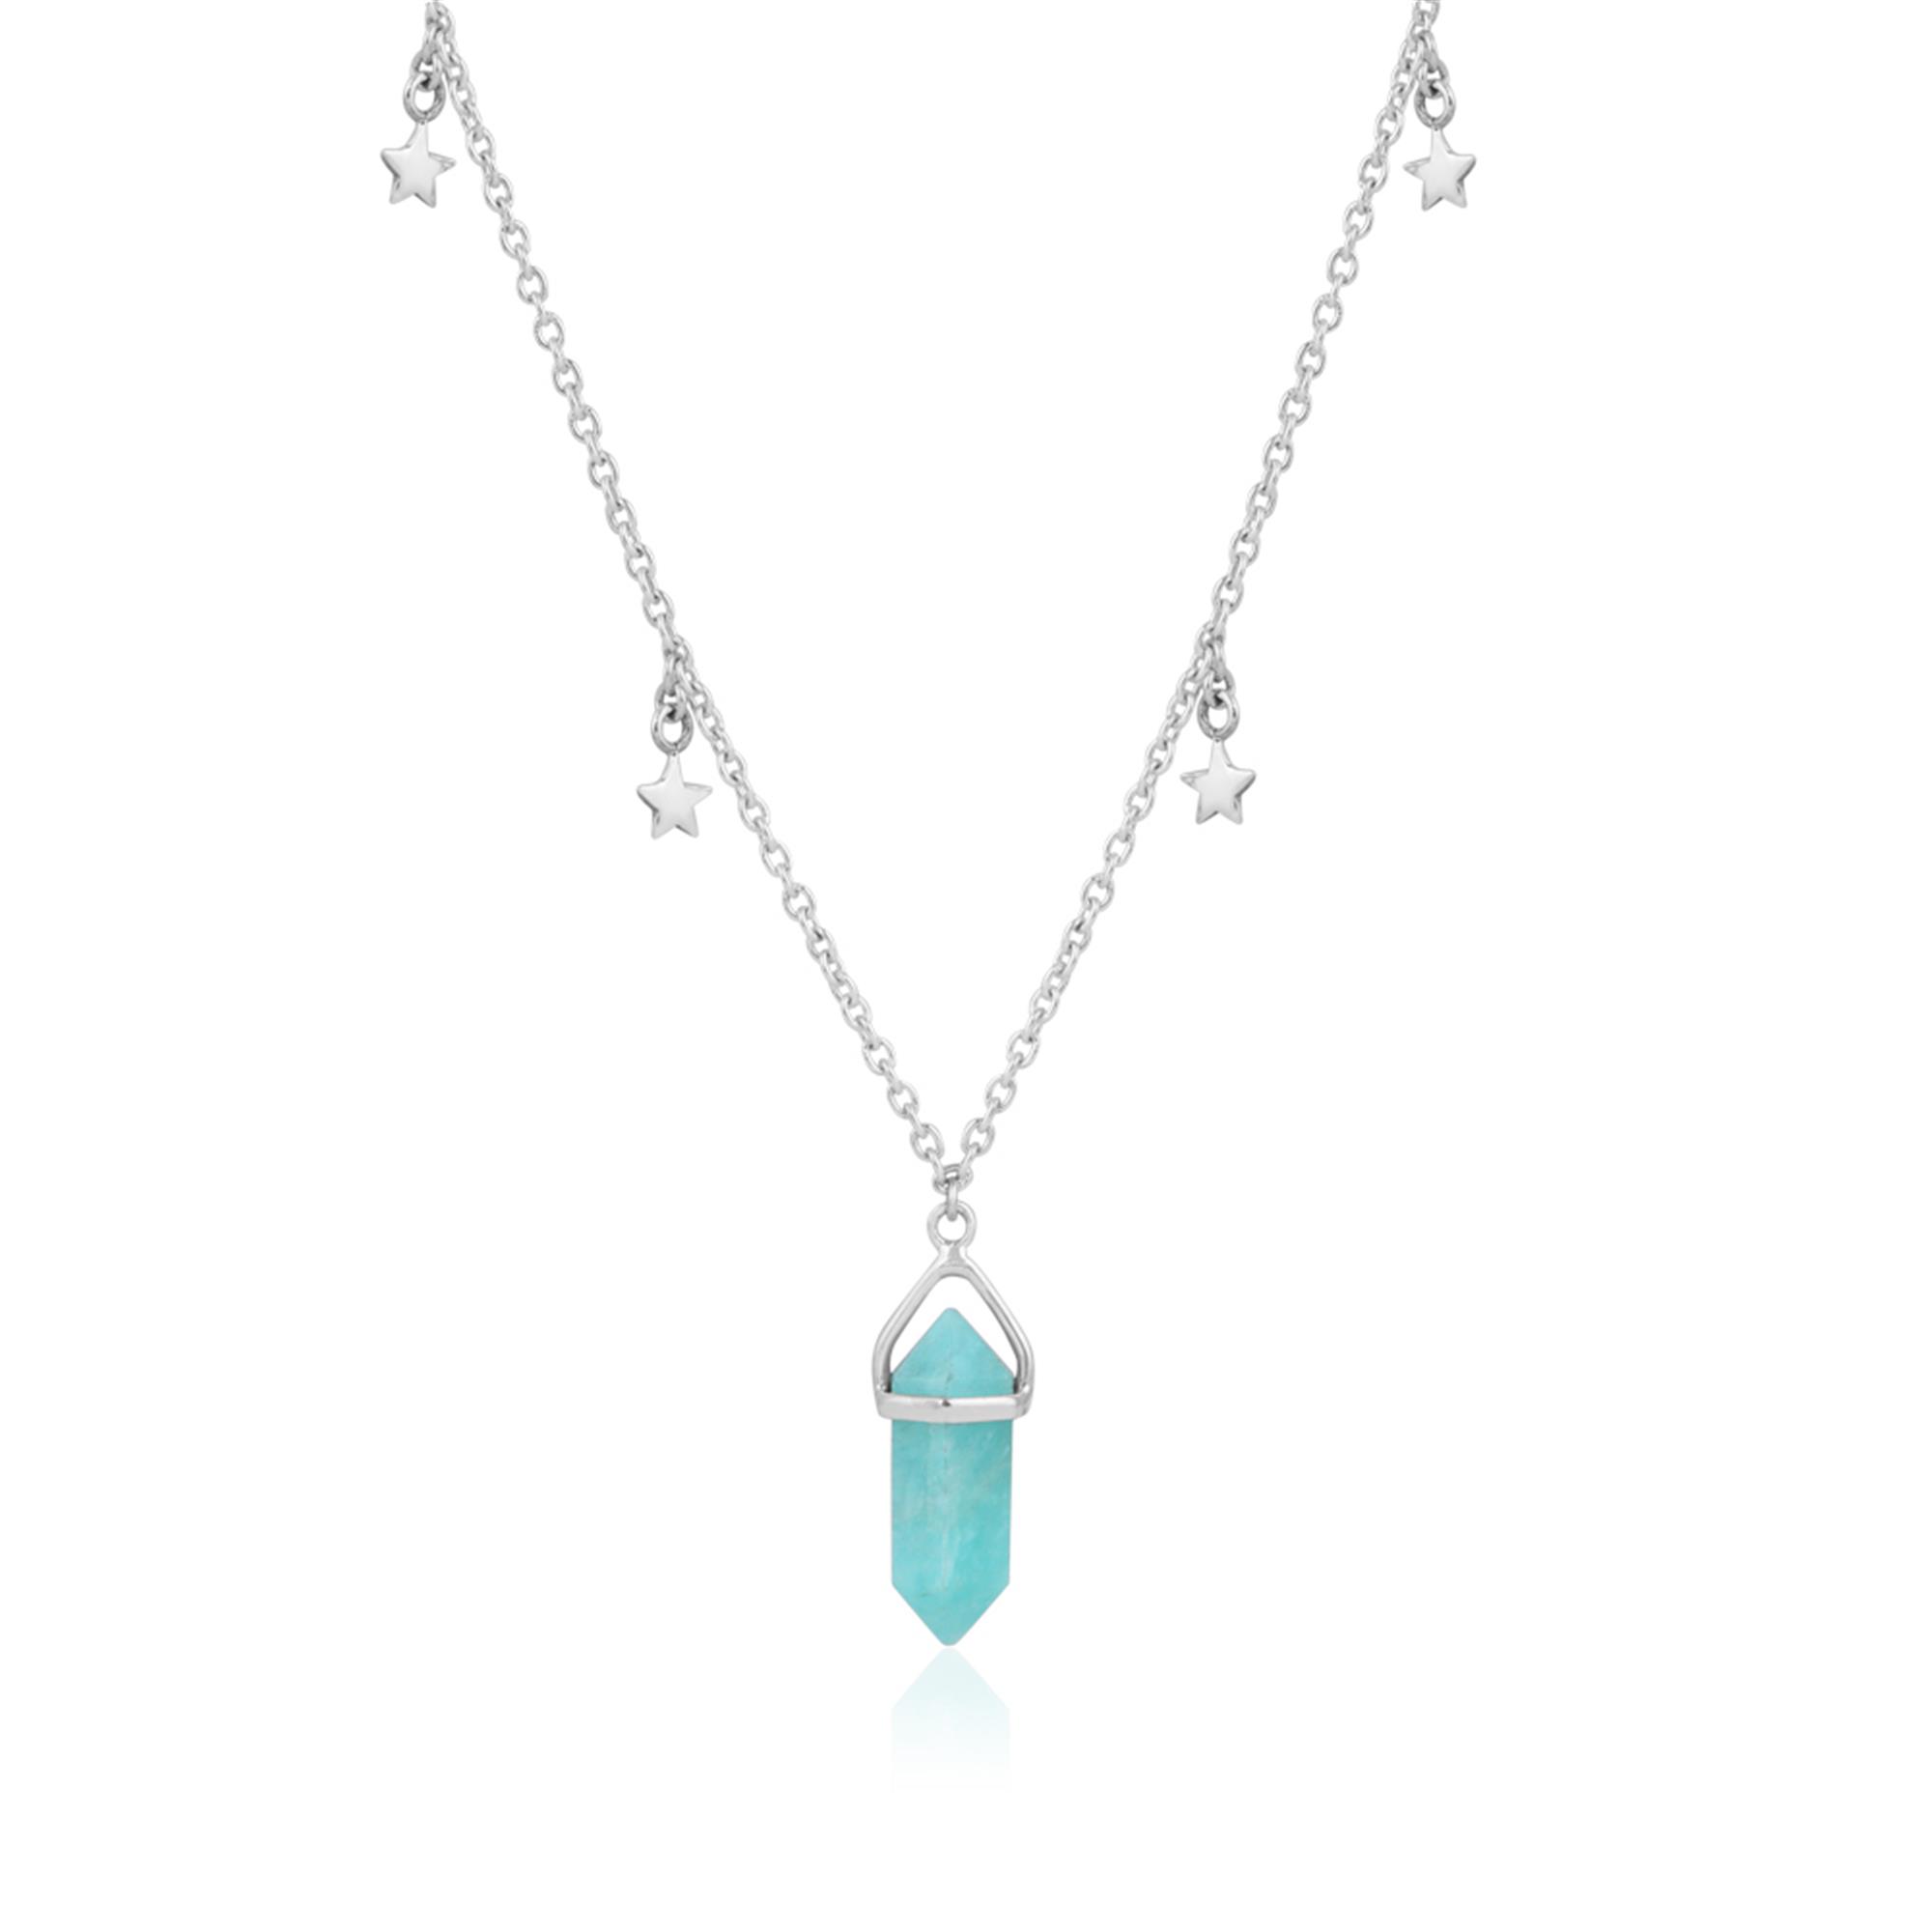 Natural Amazonite Pencil Shape 925 Sterling Silver Reiki Point Pendulum Pendant Necklace With Star Charms On The Chain  